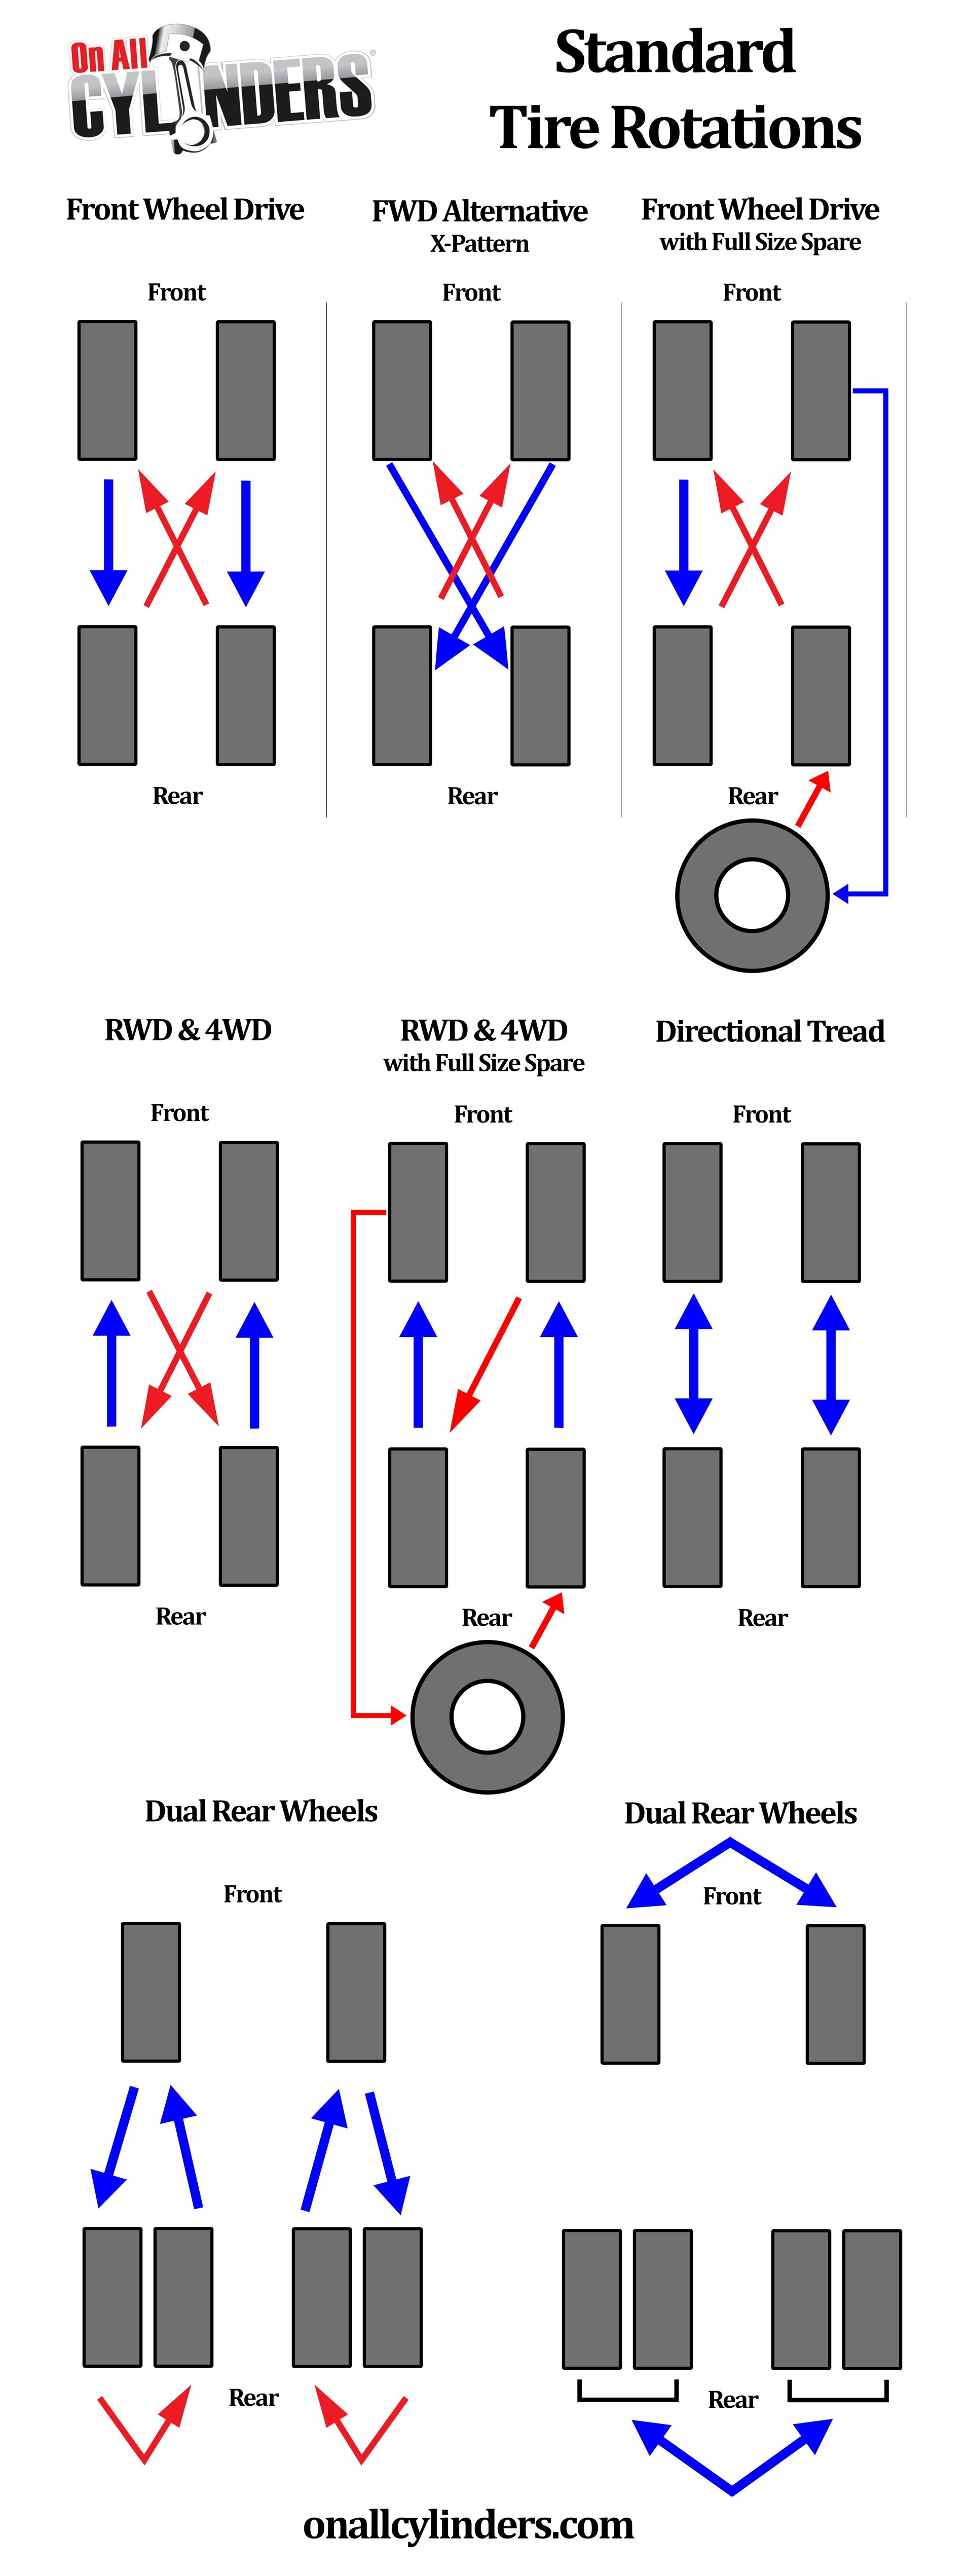 Front Wheel Drive Tire Rotation Diagram Radial Tire Rotation Diagram Industry Standards and Tyre Stamping Of Front Wheel Drive Tire Rotation Diagram